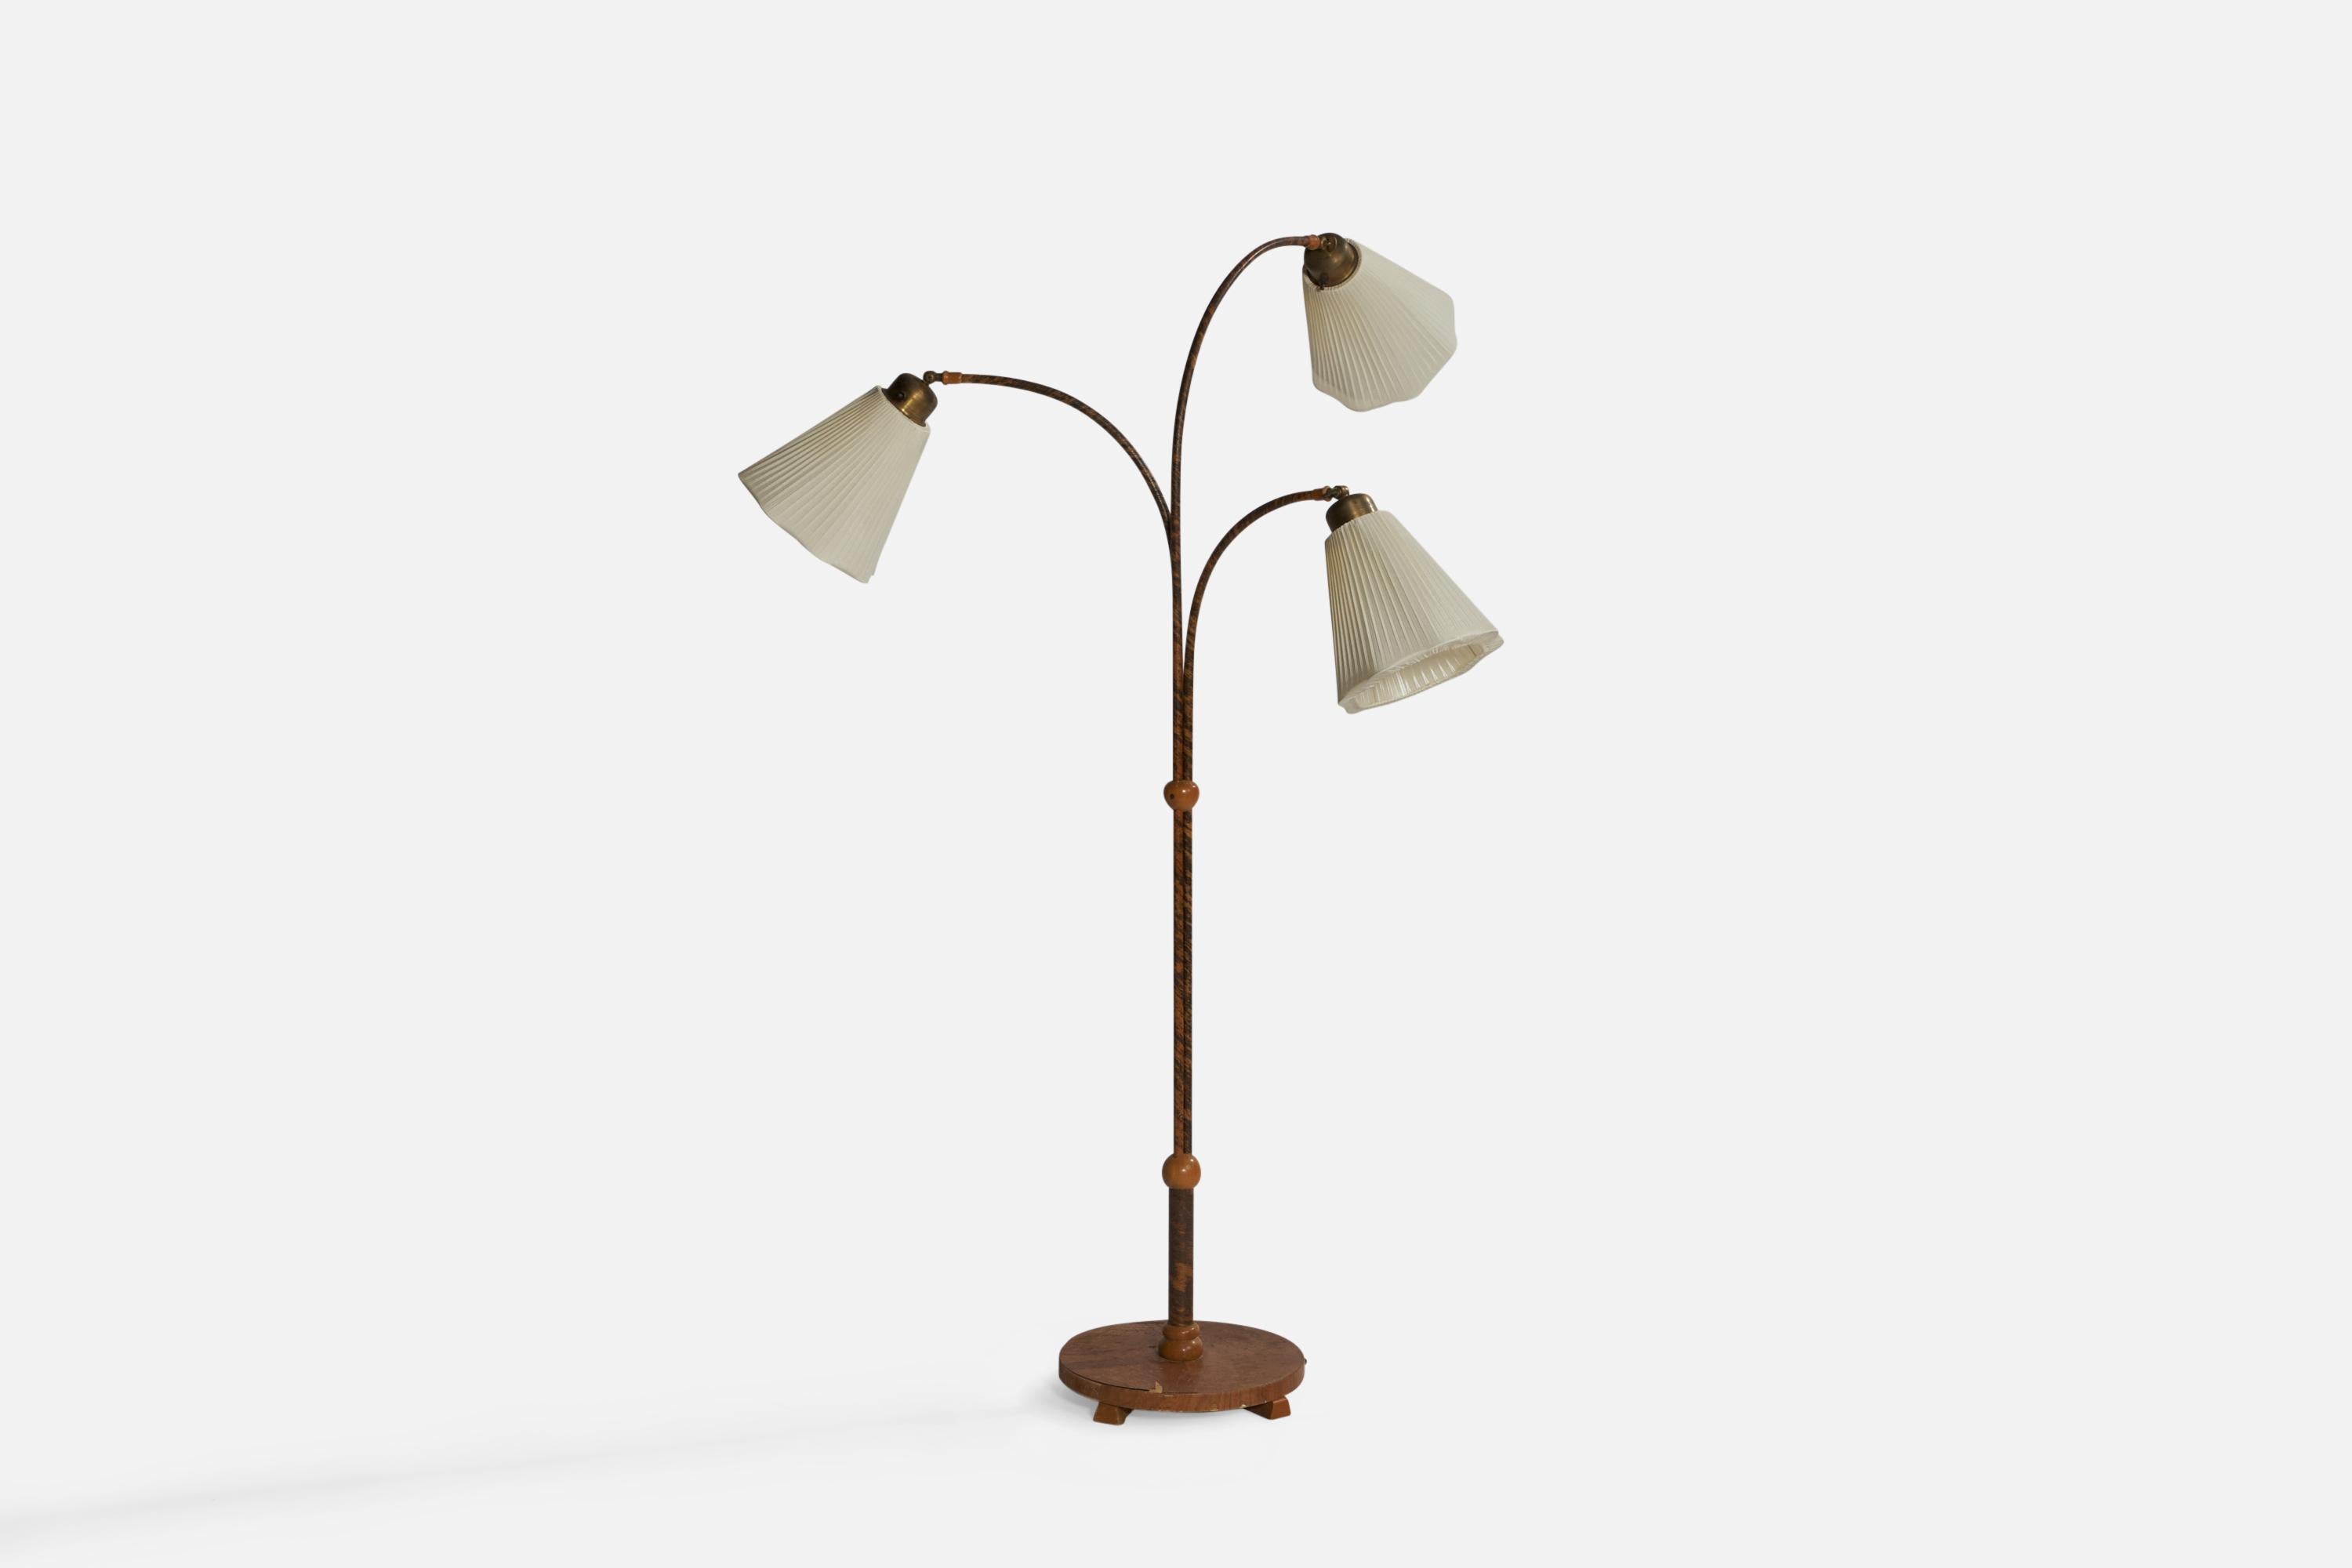 An adjustable three-armed brass, elm, wood veneer and off-white fabric floor lamp designed and produced in Sweden, c. 1940s.

Overall Dimensions (inches): 60.75” x 43.5” W x 32.5” D. Stated dimensions include shades.
Dimensions vary based on